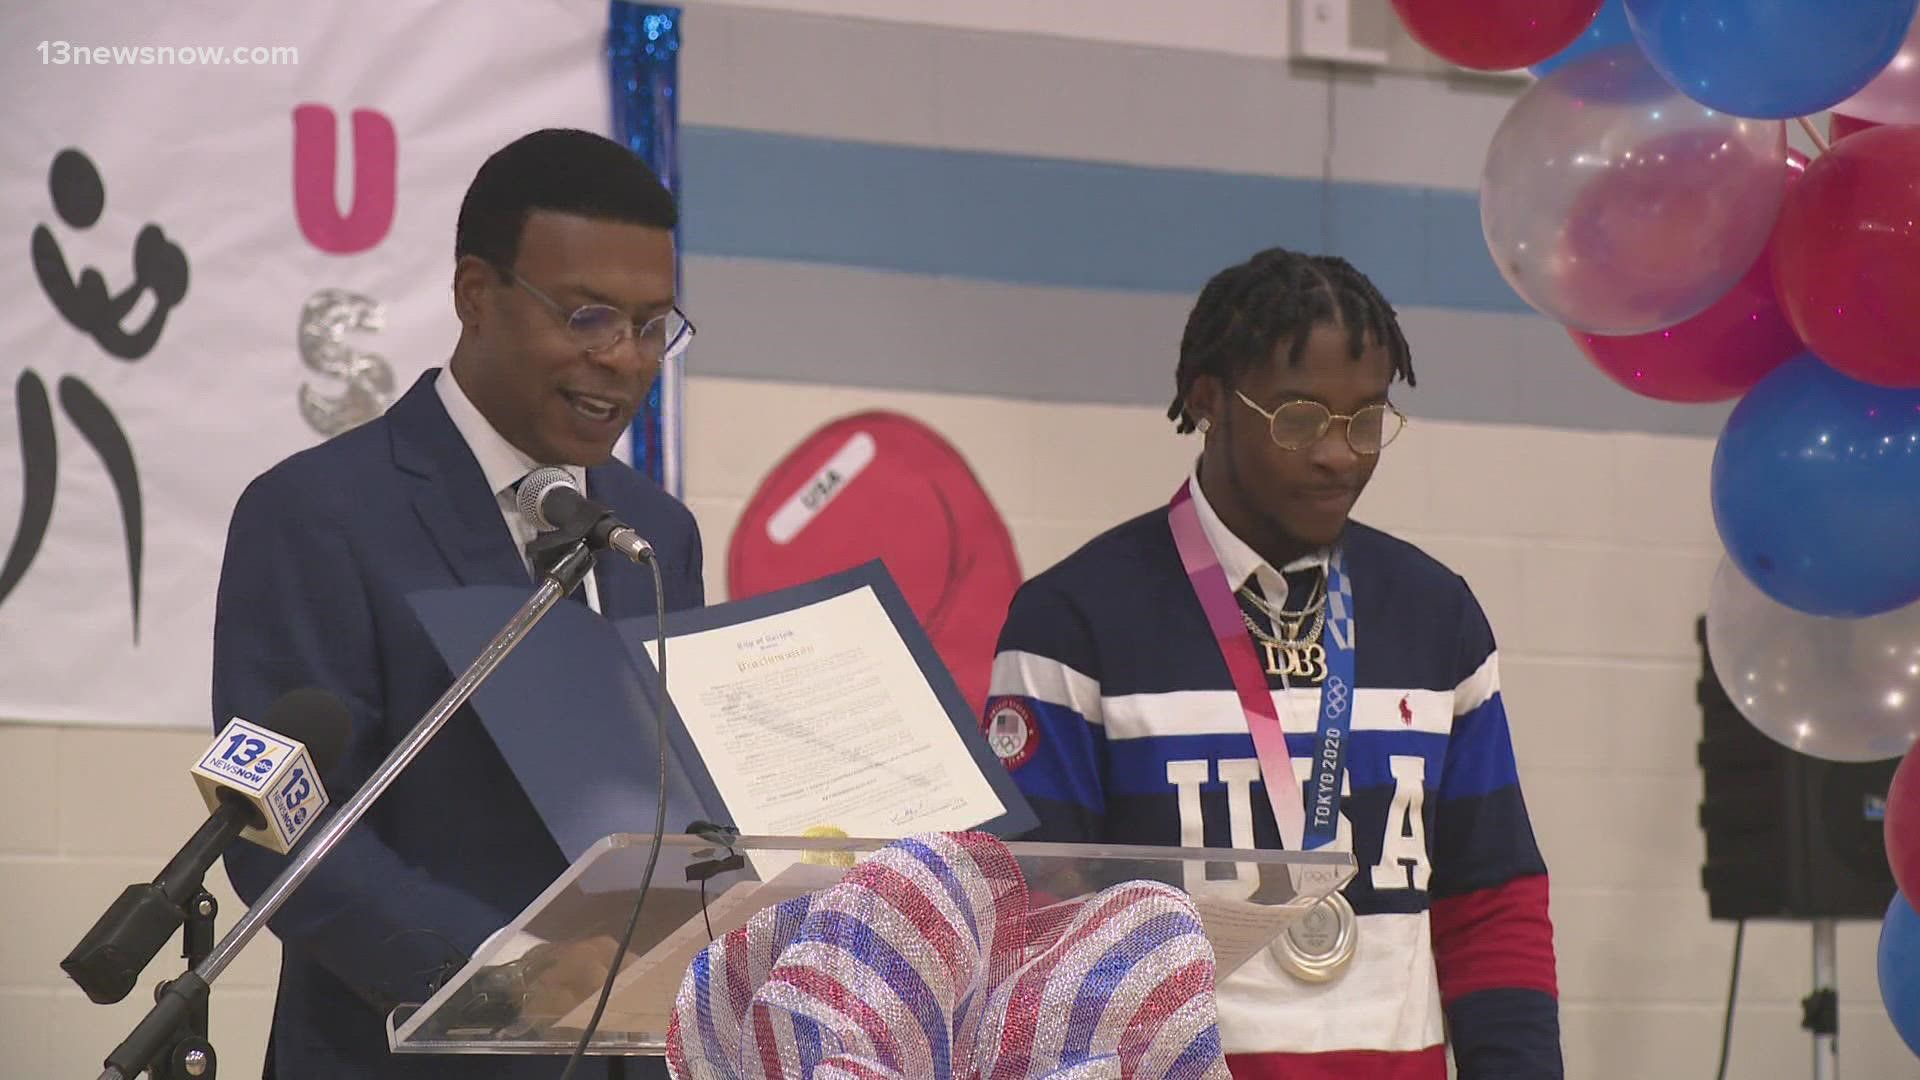 Weather forced organizers to cancel a parade but celebrations continued at Lambert’s Point Rec Center where the mayor proclaimed Aug. 21, Keyshawn Davis Day.